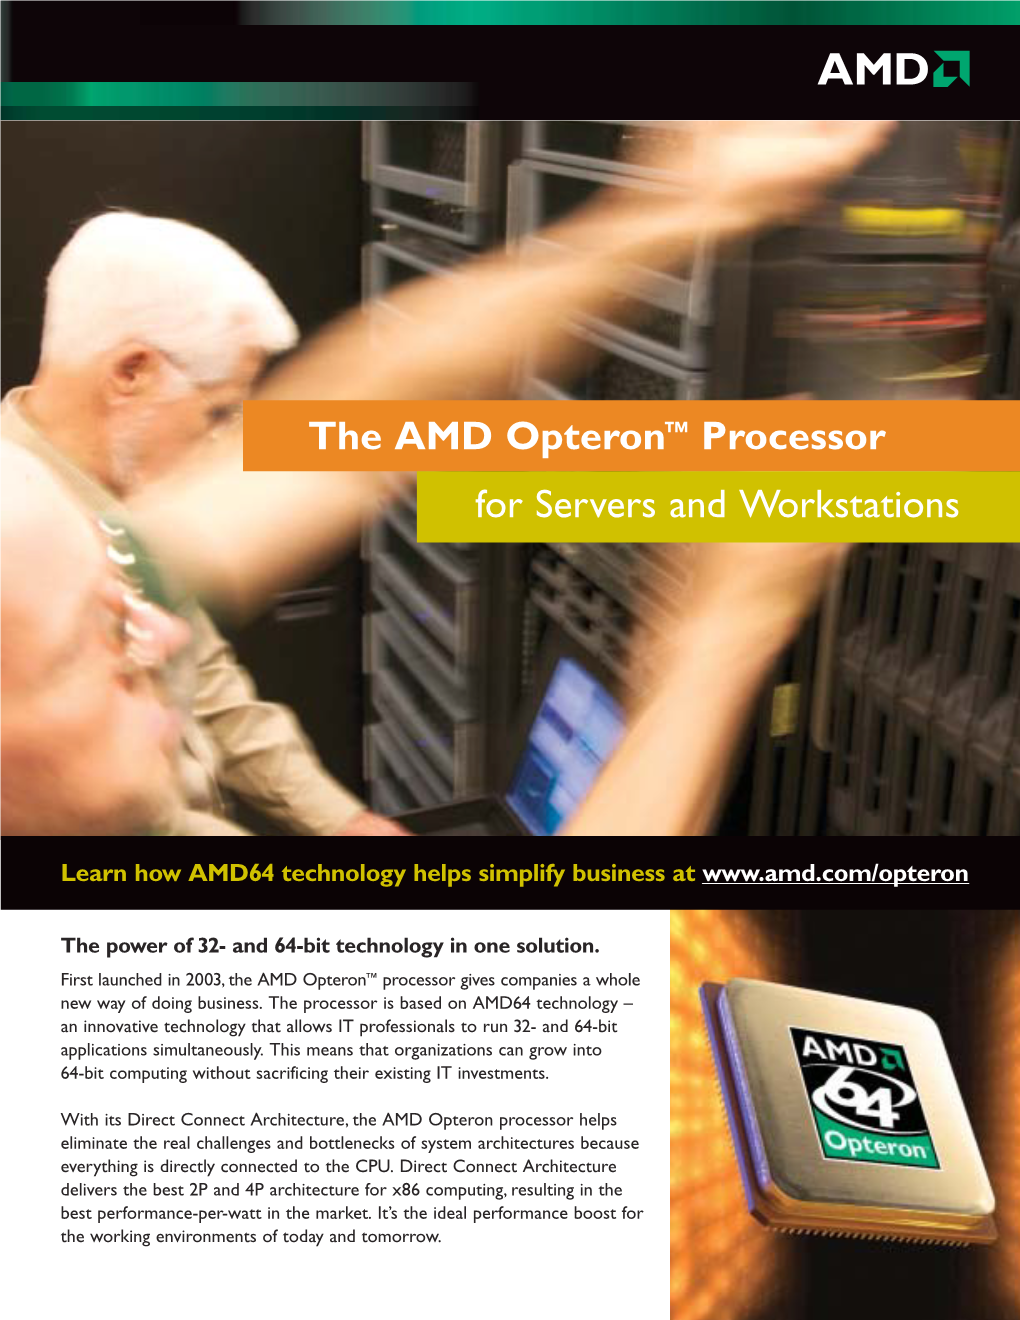 The AMD Opteron™ Processor for Servers and Workstations